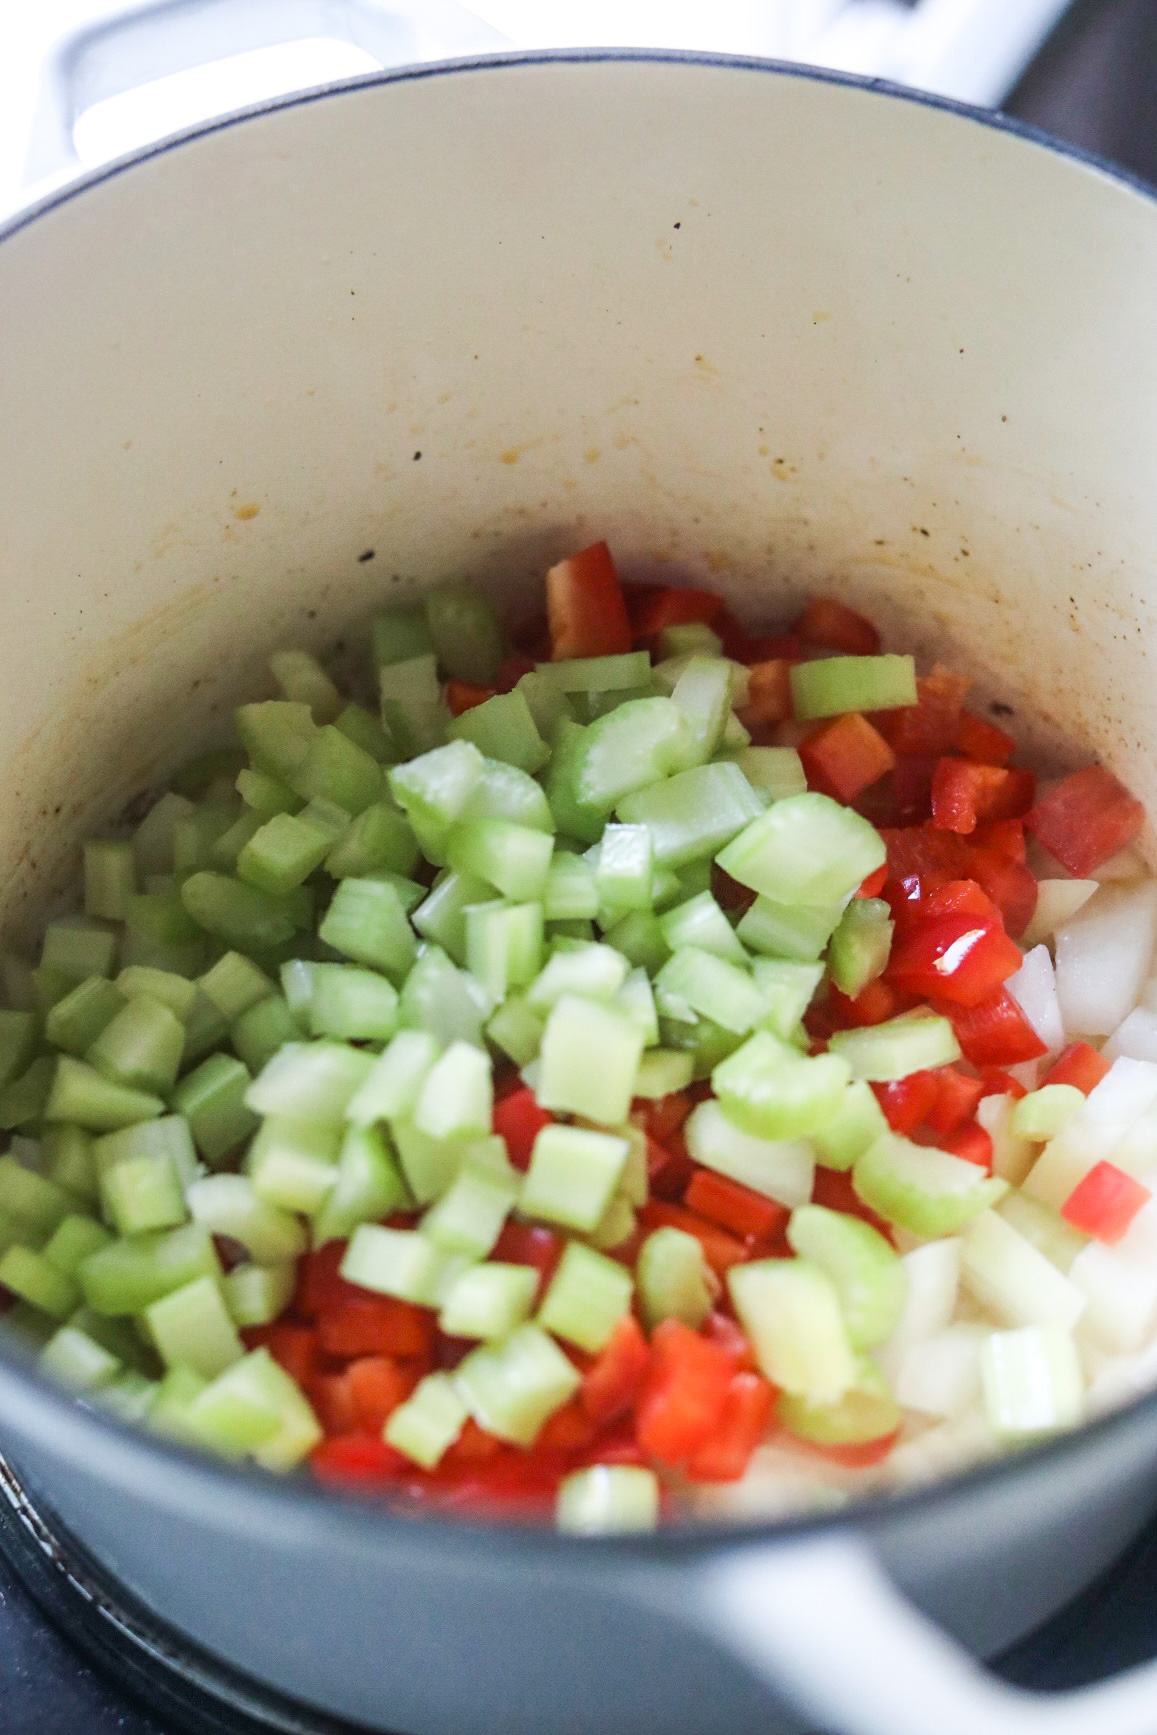 Celery, Onion, and Red Pepper